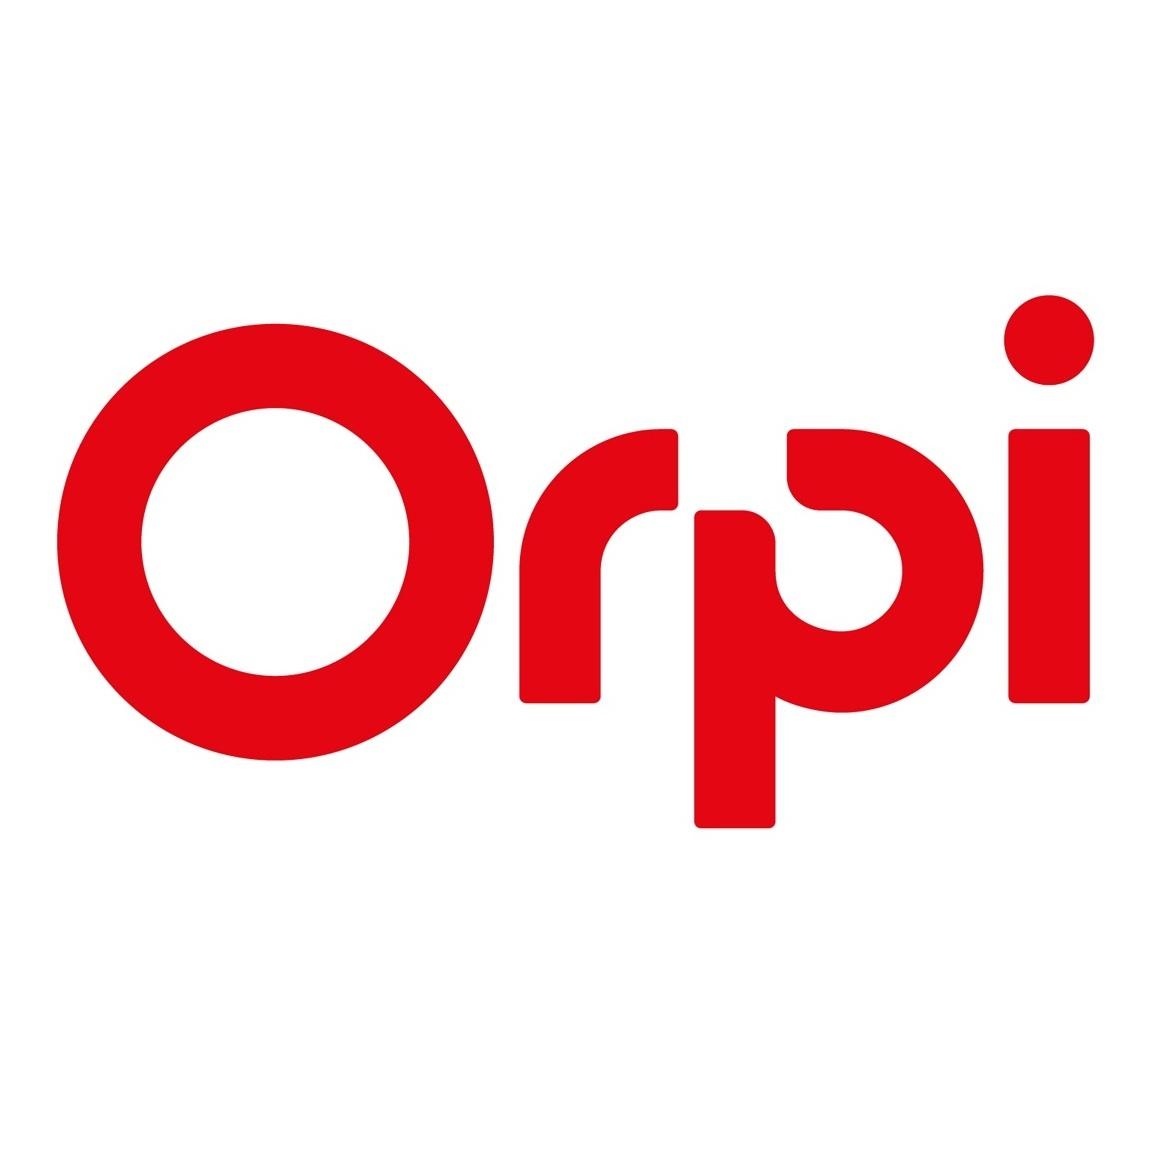 Orpi Vernier Immo Conseil Neuilly-sur-marne Neuilly Sur Marne